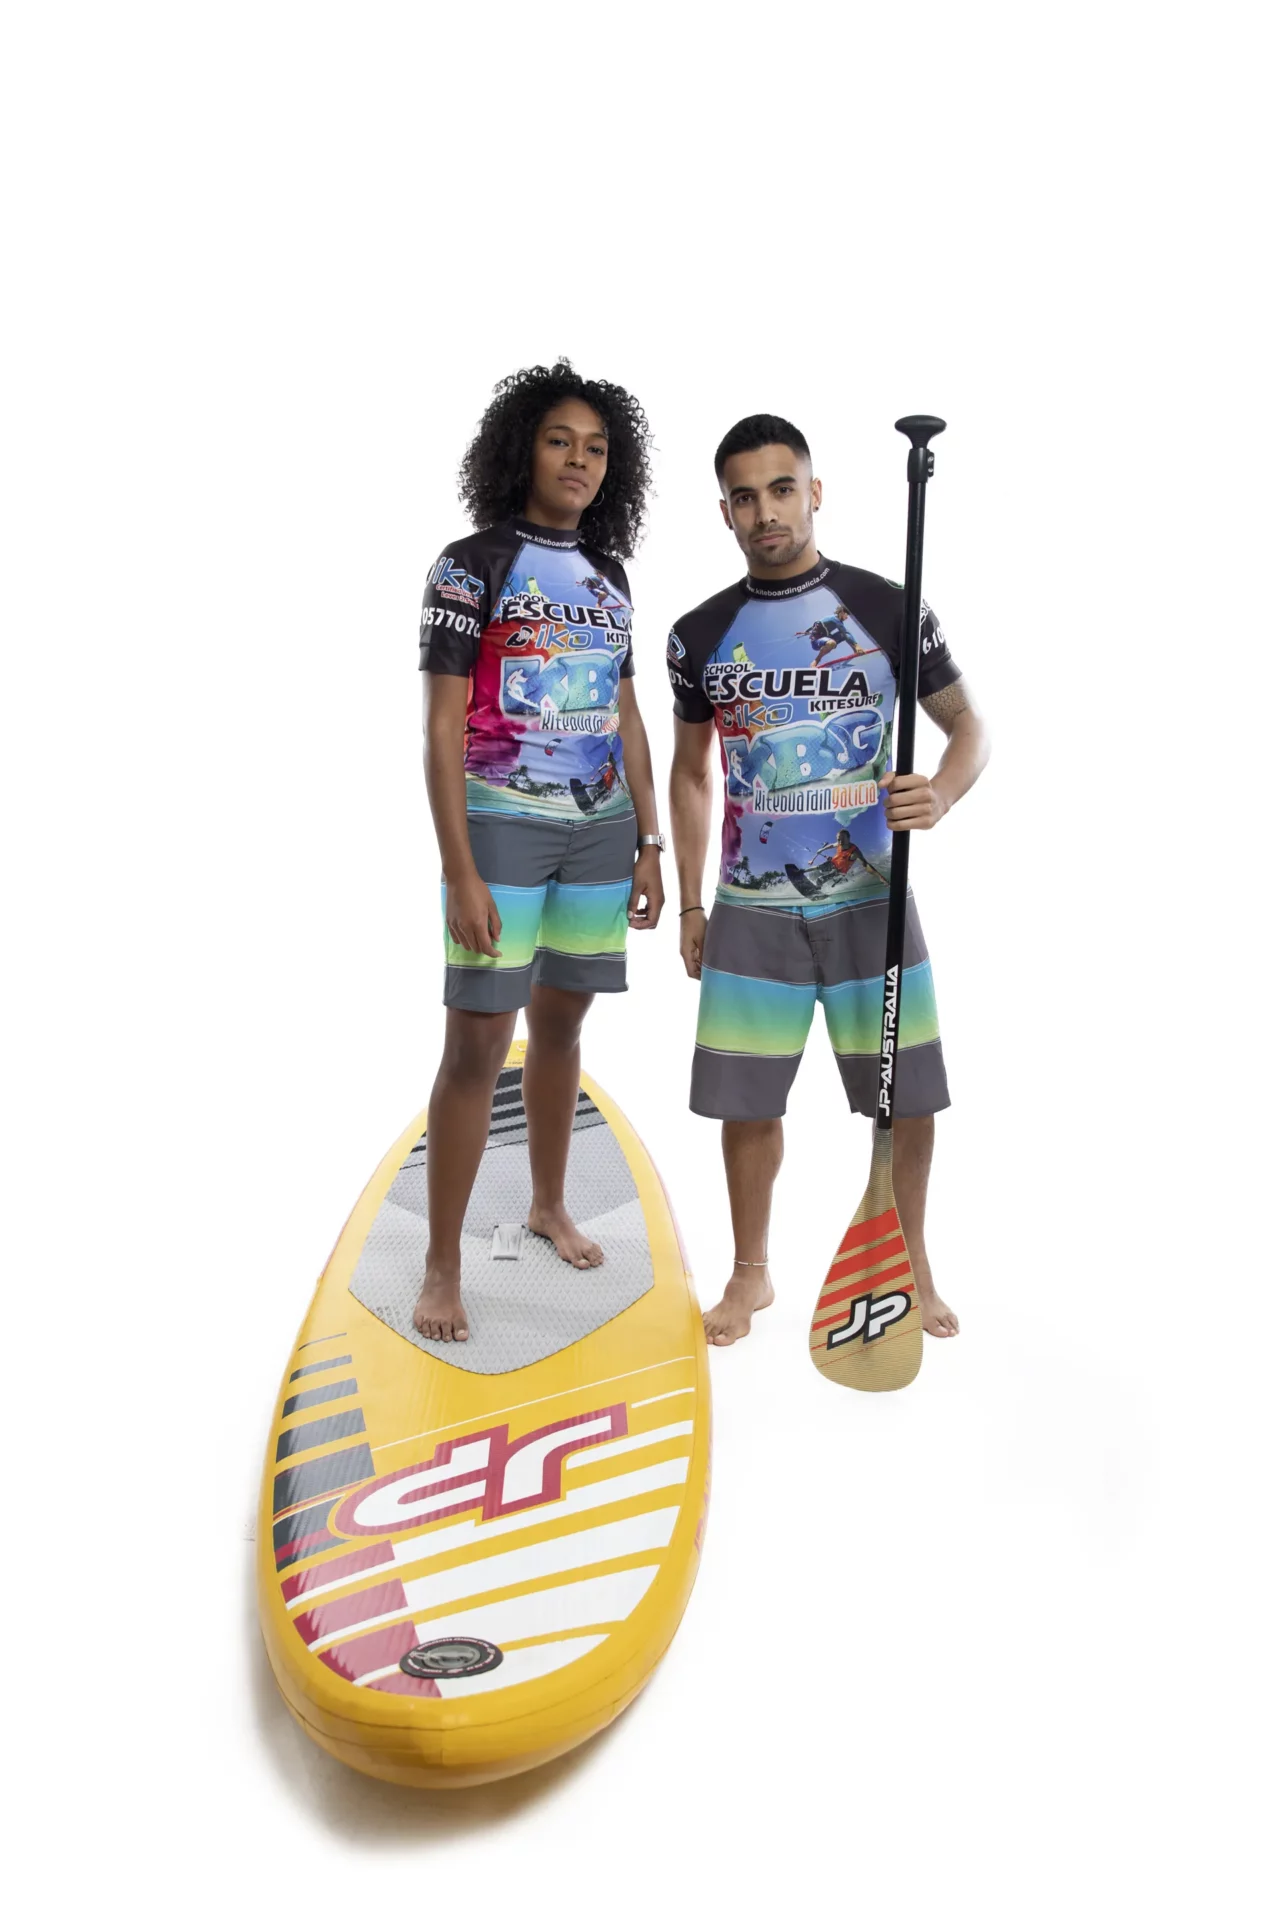 clases-paddle-sup-galicia